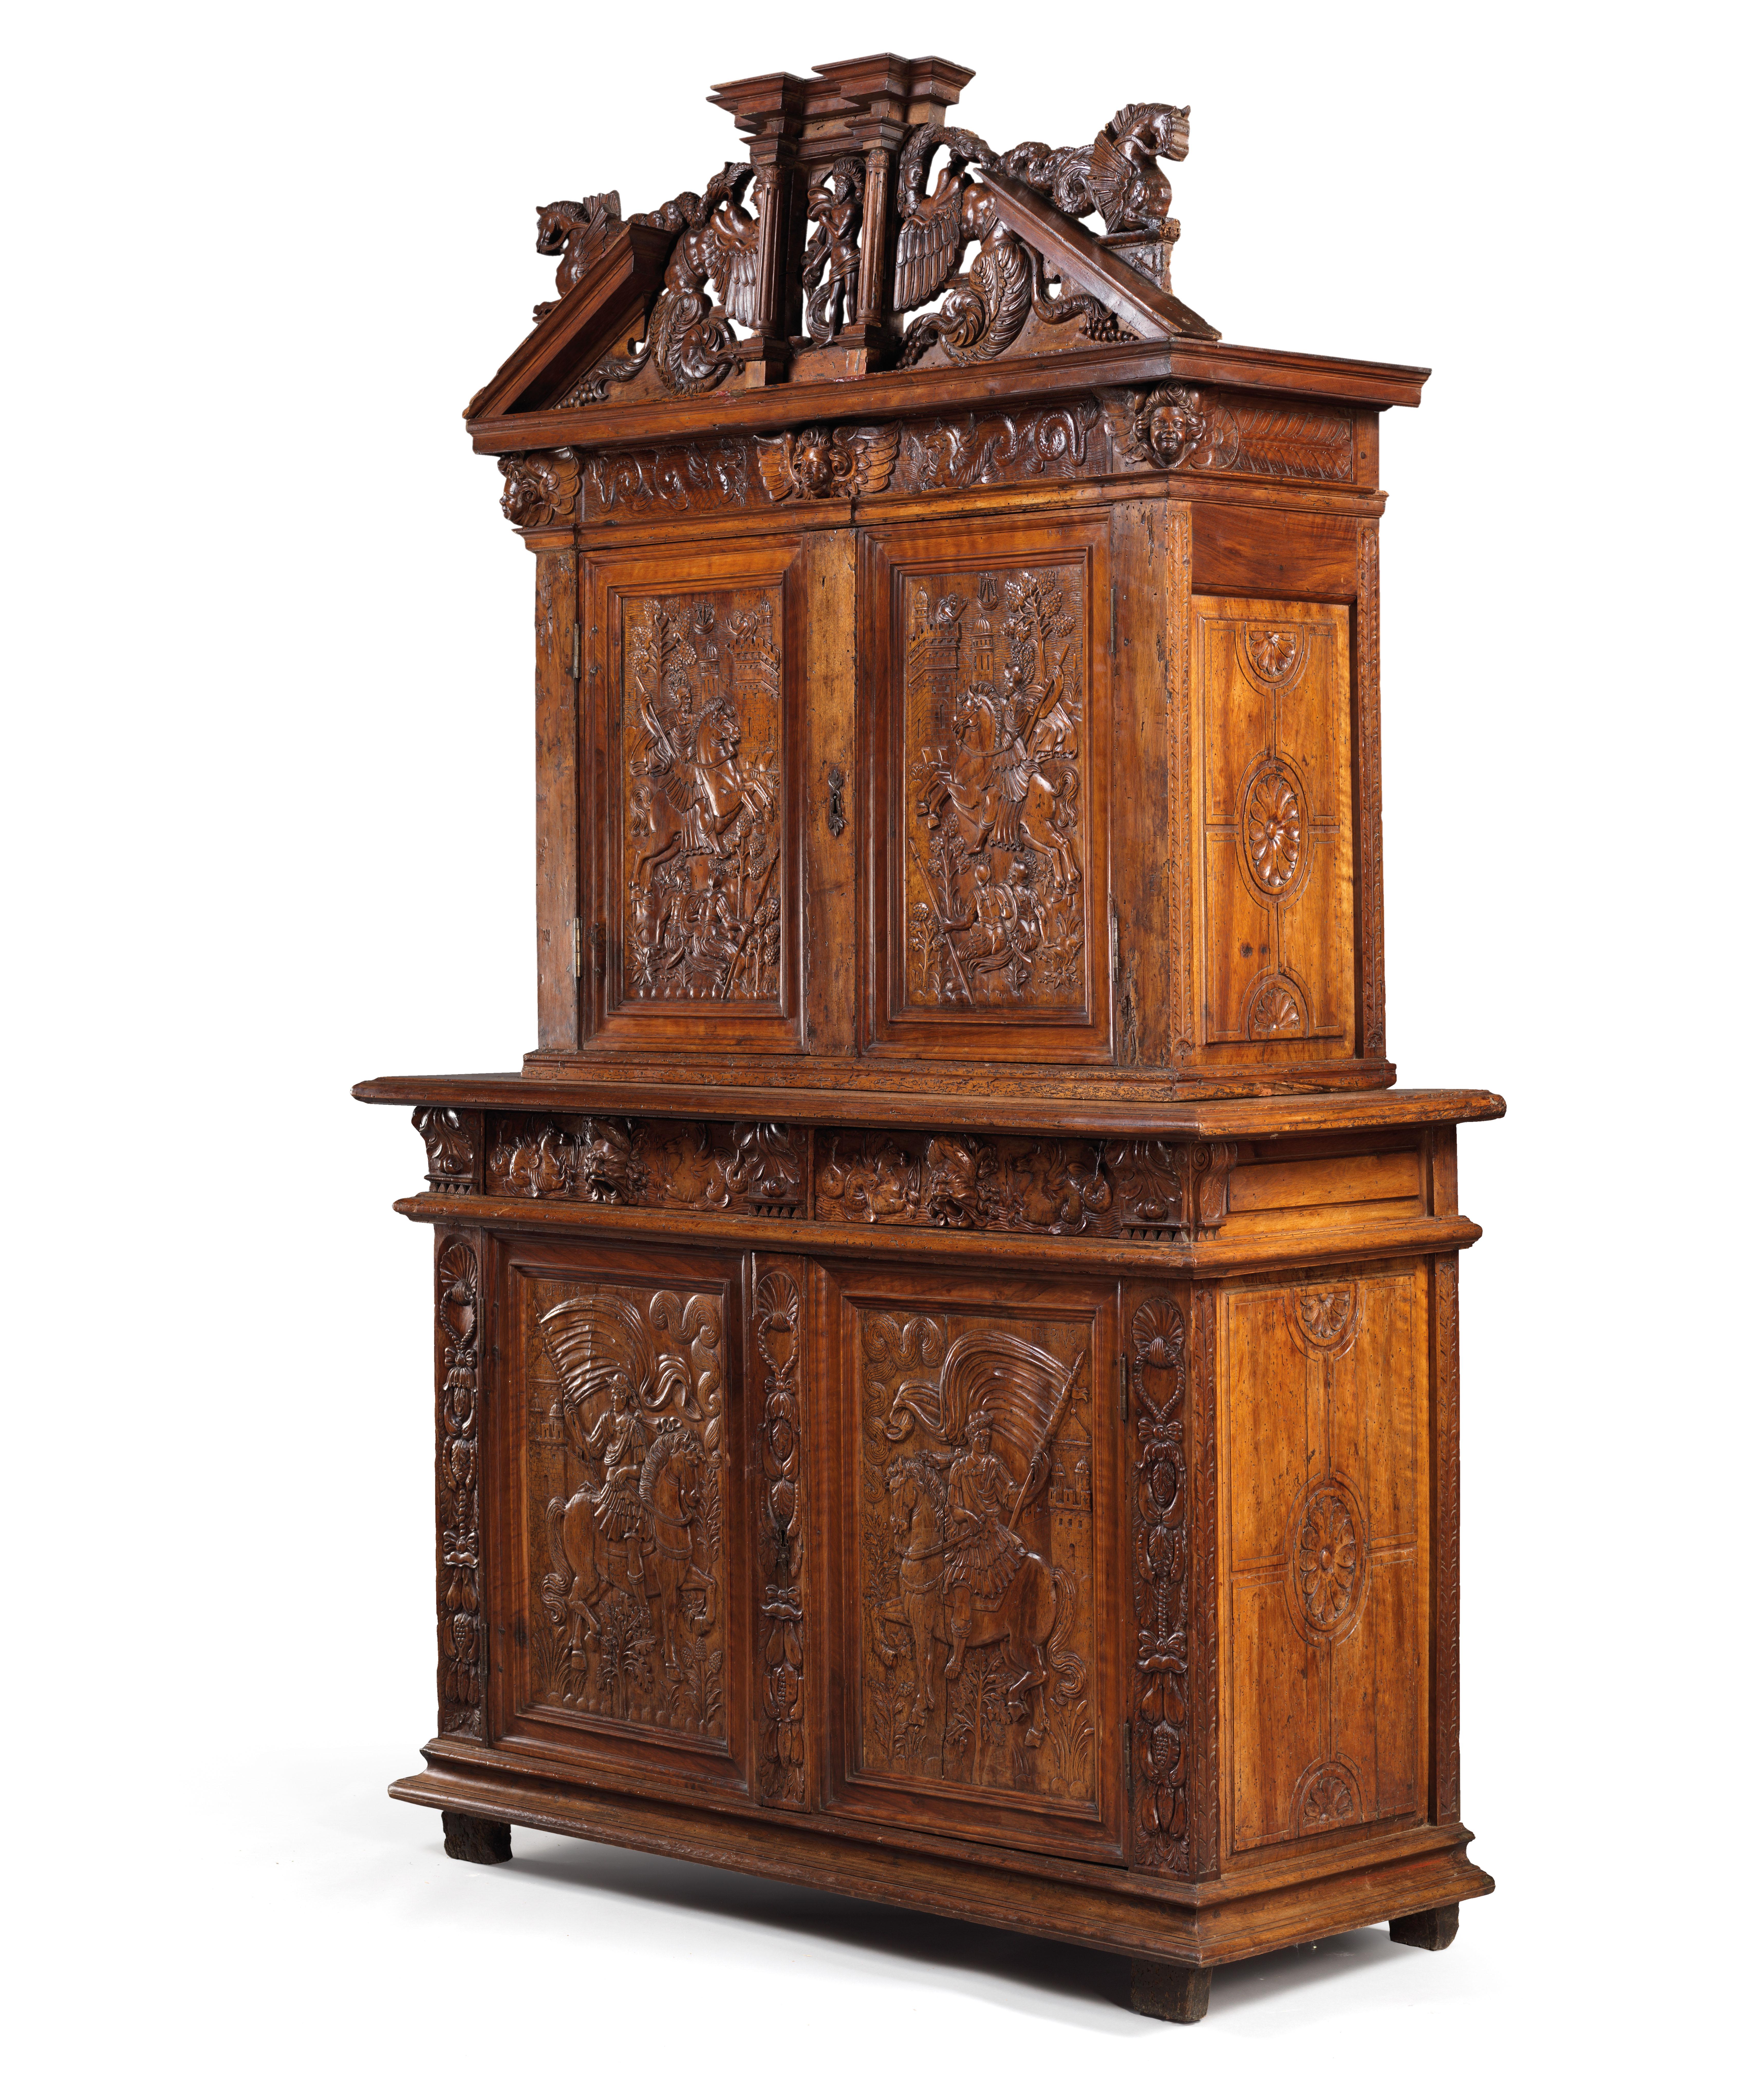 Renaissance 16th Century Cabinet with Knights Carving from Avignon Workshops 'France' For Sale